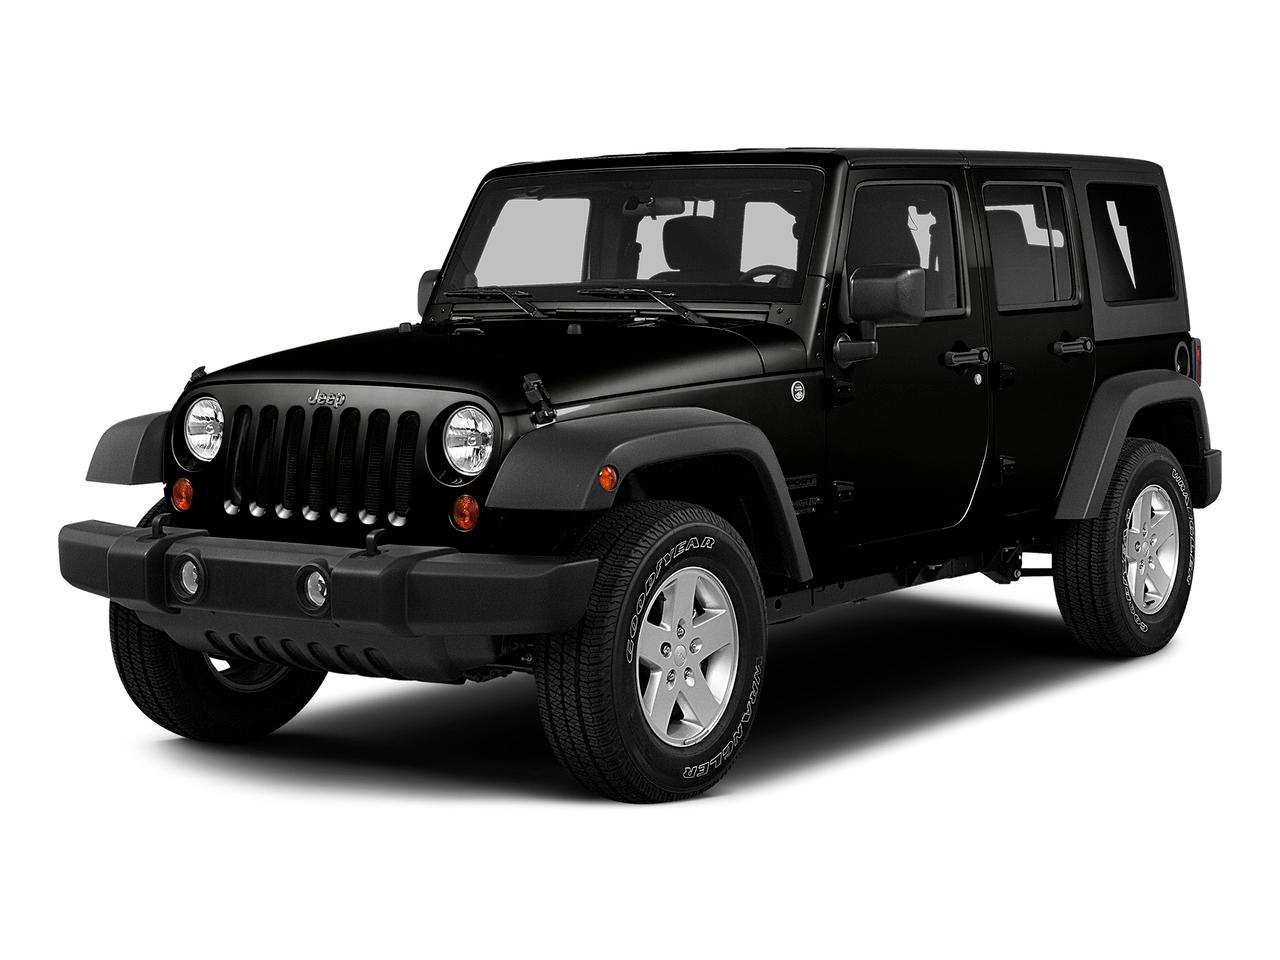 2015 Jeep Wrangler Unlimited Vehicle Photo in POST FALLS, ID 83854-5365